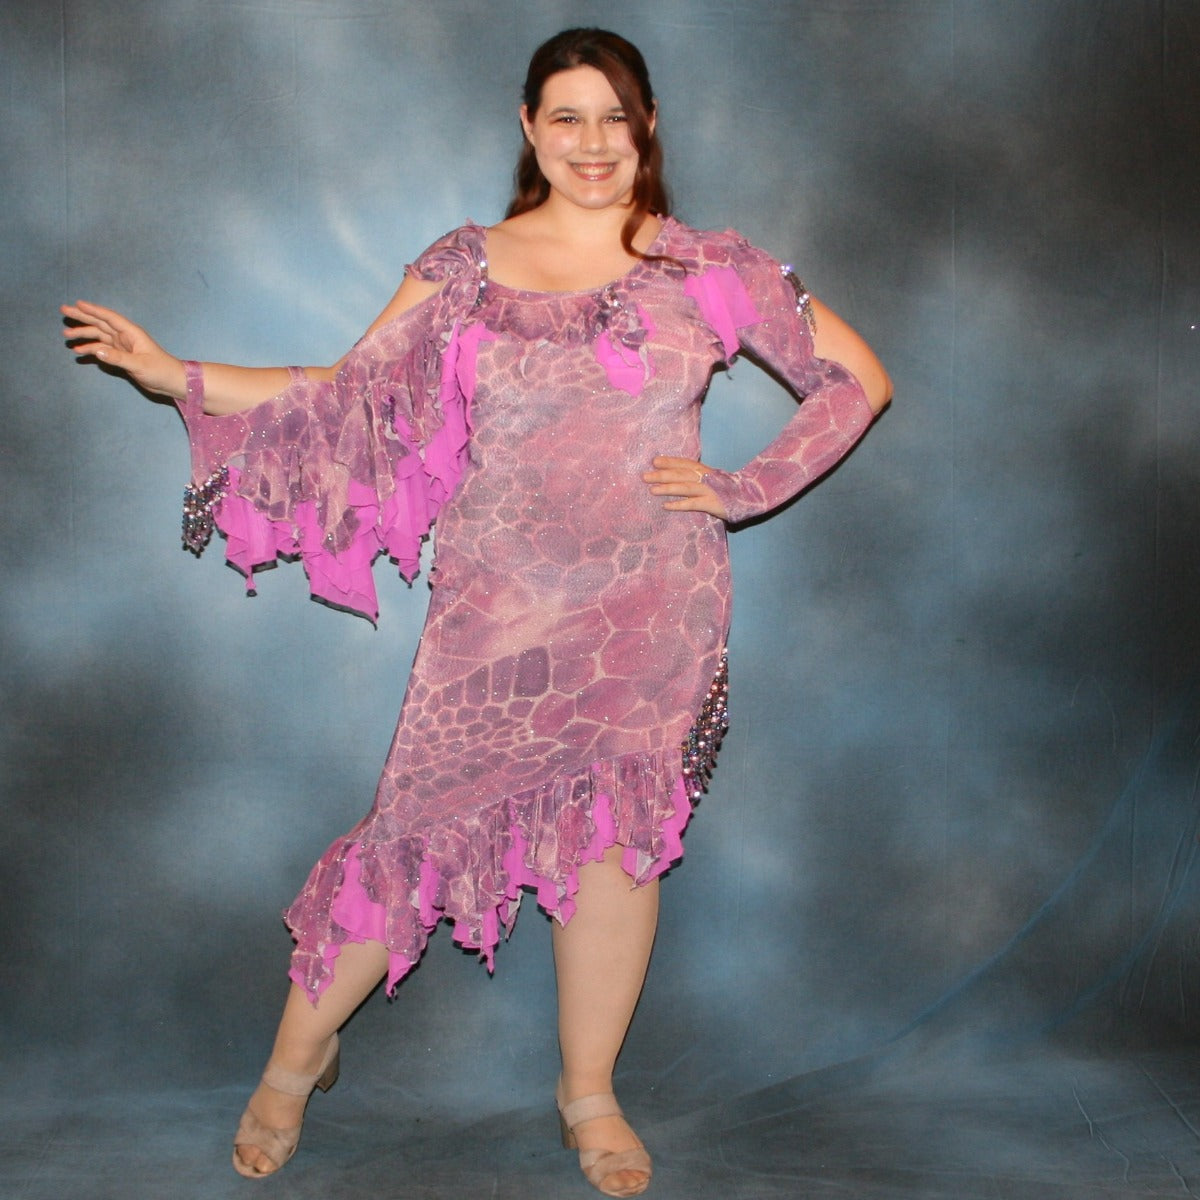 Crystal's Creations Orchid Latin/rhythm dress created of wild orchid & violet printed glitter slinky has orchid accents, flounces on one arm & skirt, embellished with Swarovski hand beading of various shades of orchid & shapes through out, is a fun & colorful Latin/rhythm dress